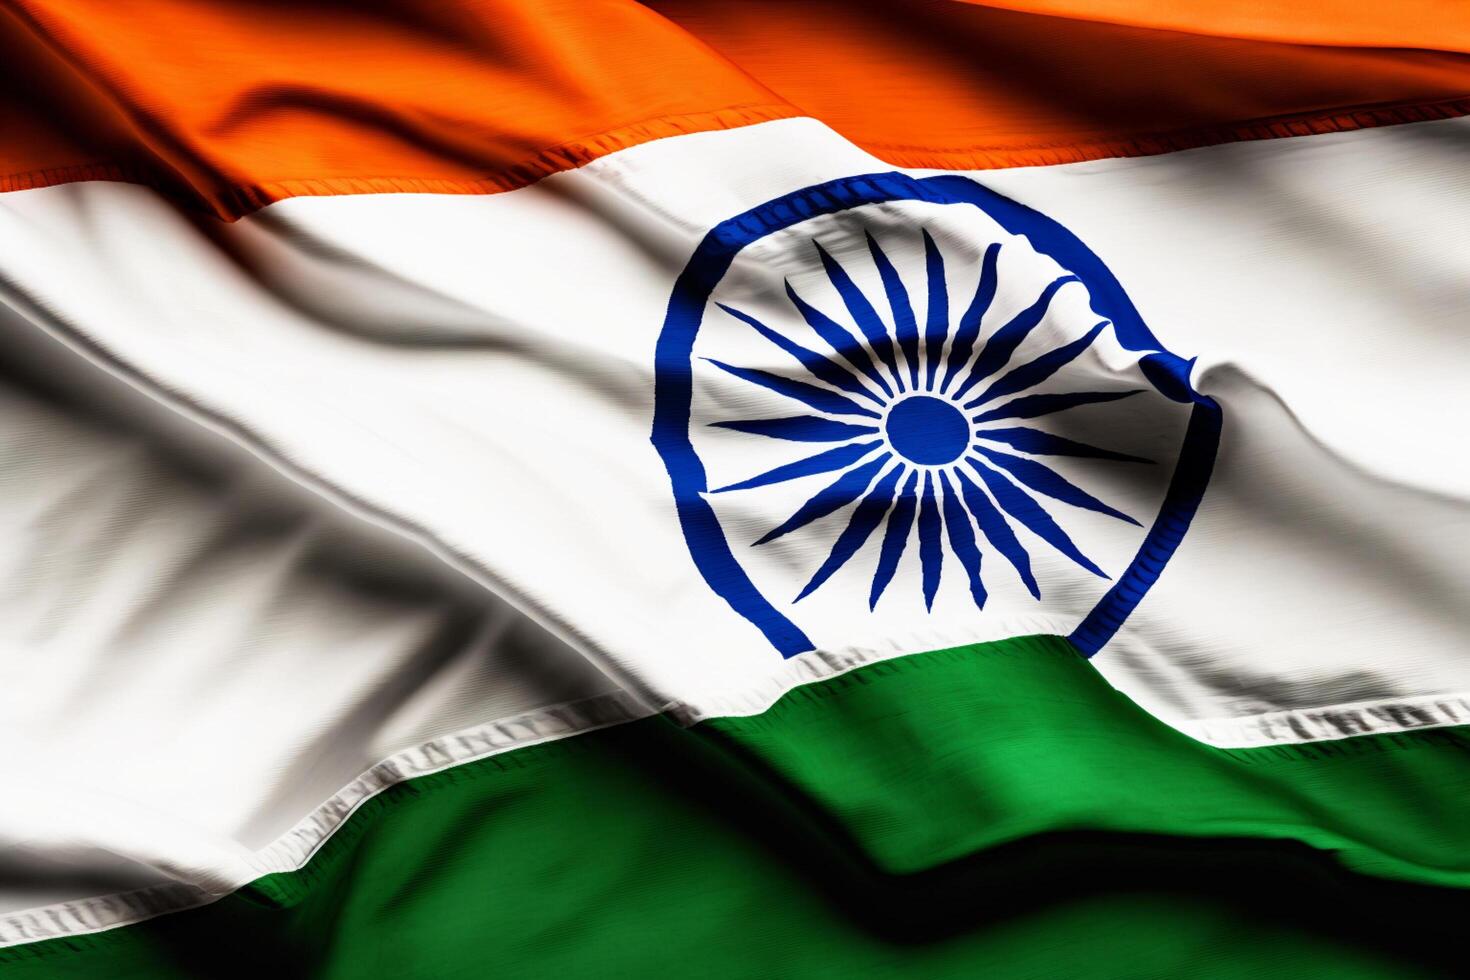 Realistic of the waving india flag with interisting texture. Waving of national india flag. India flag background design for independence day and other celebration. Flag of india by photo